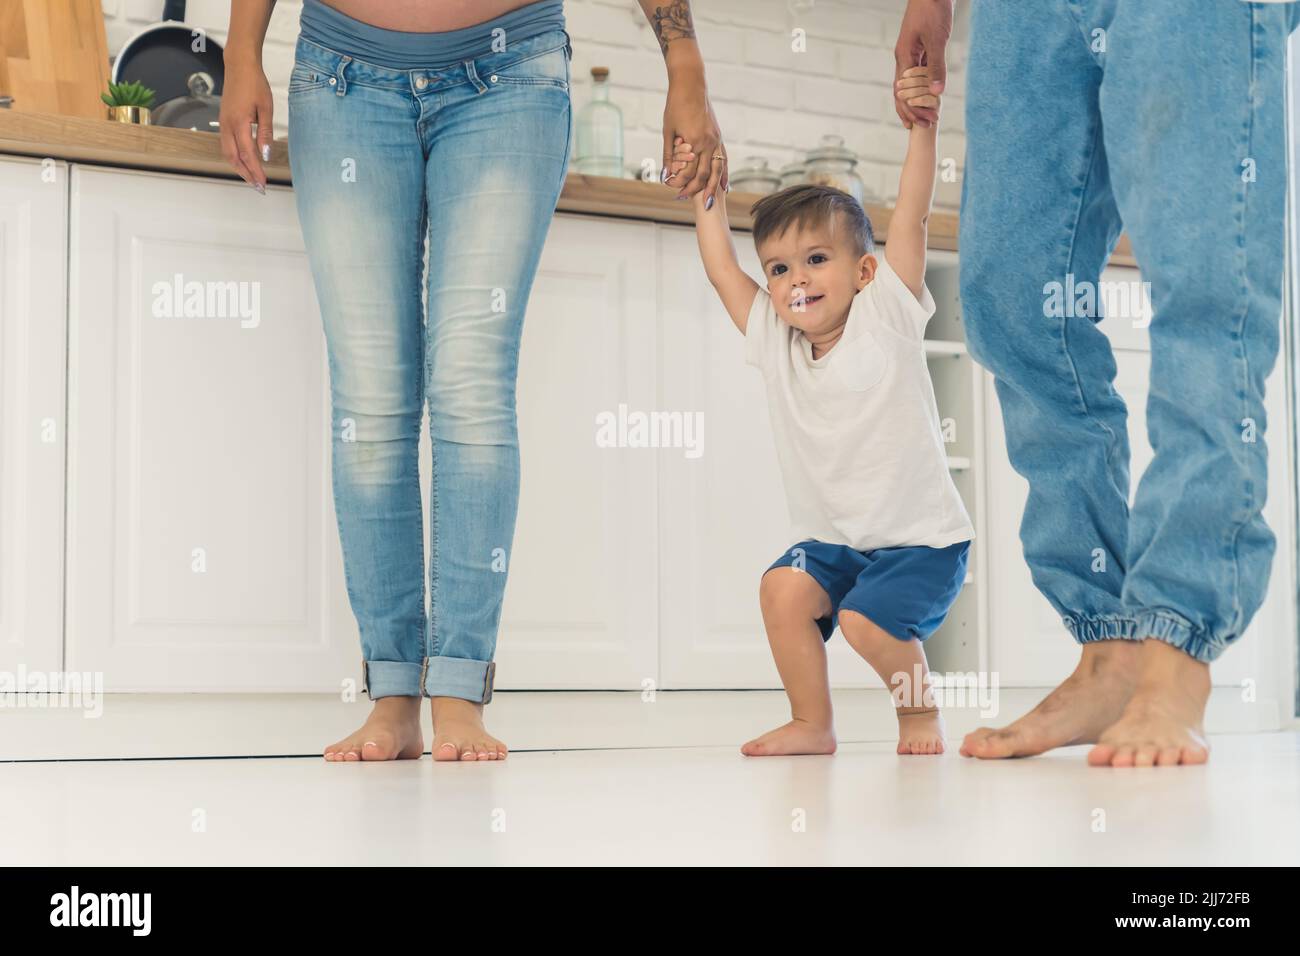 Family of three walking barefoot in their kitchen. Toddler boy standing between his parents and holding their hands in order to jump up. High quality photo Stock Photo